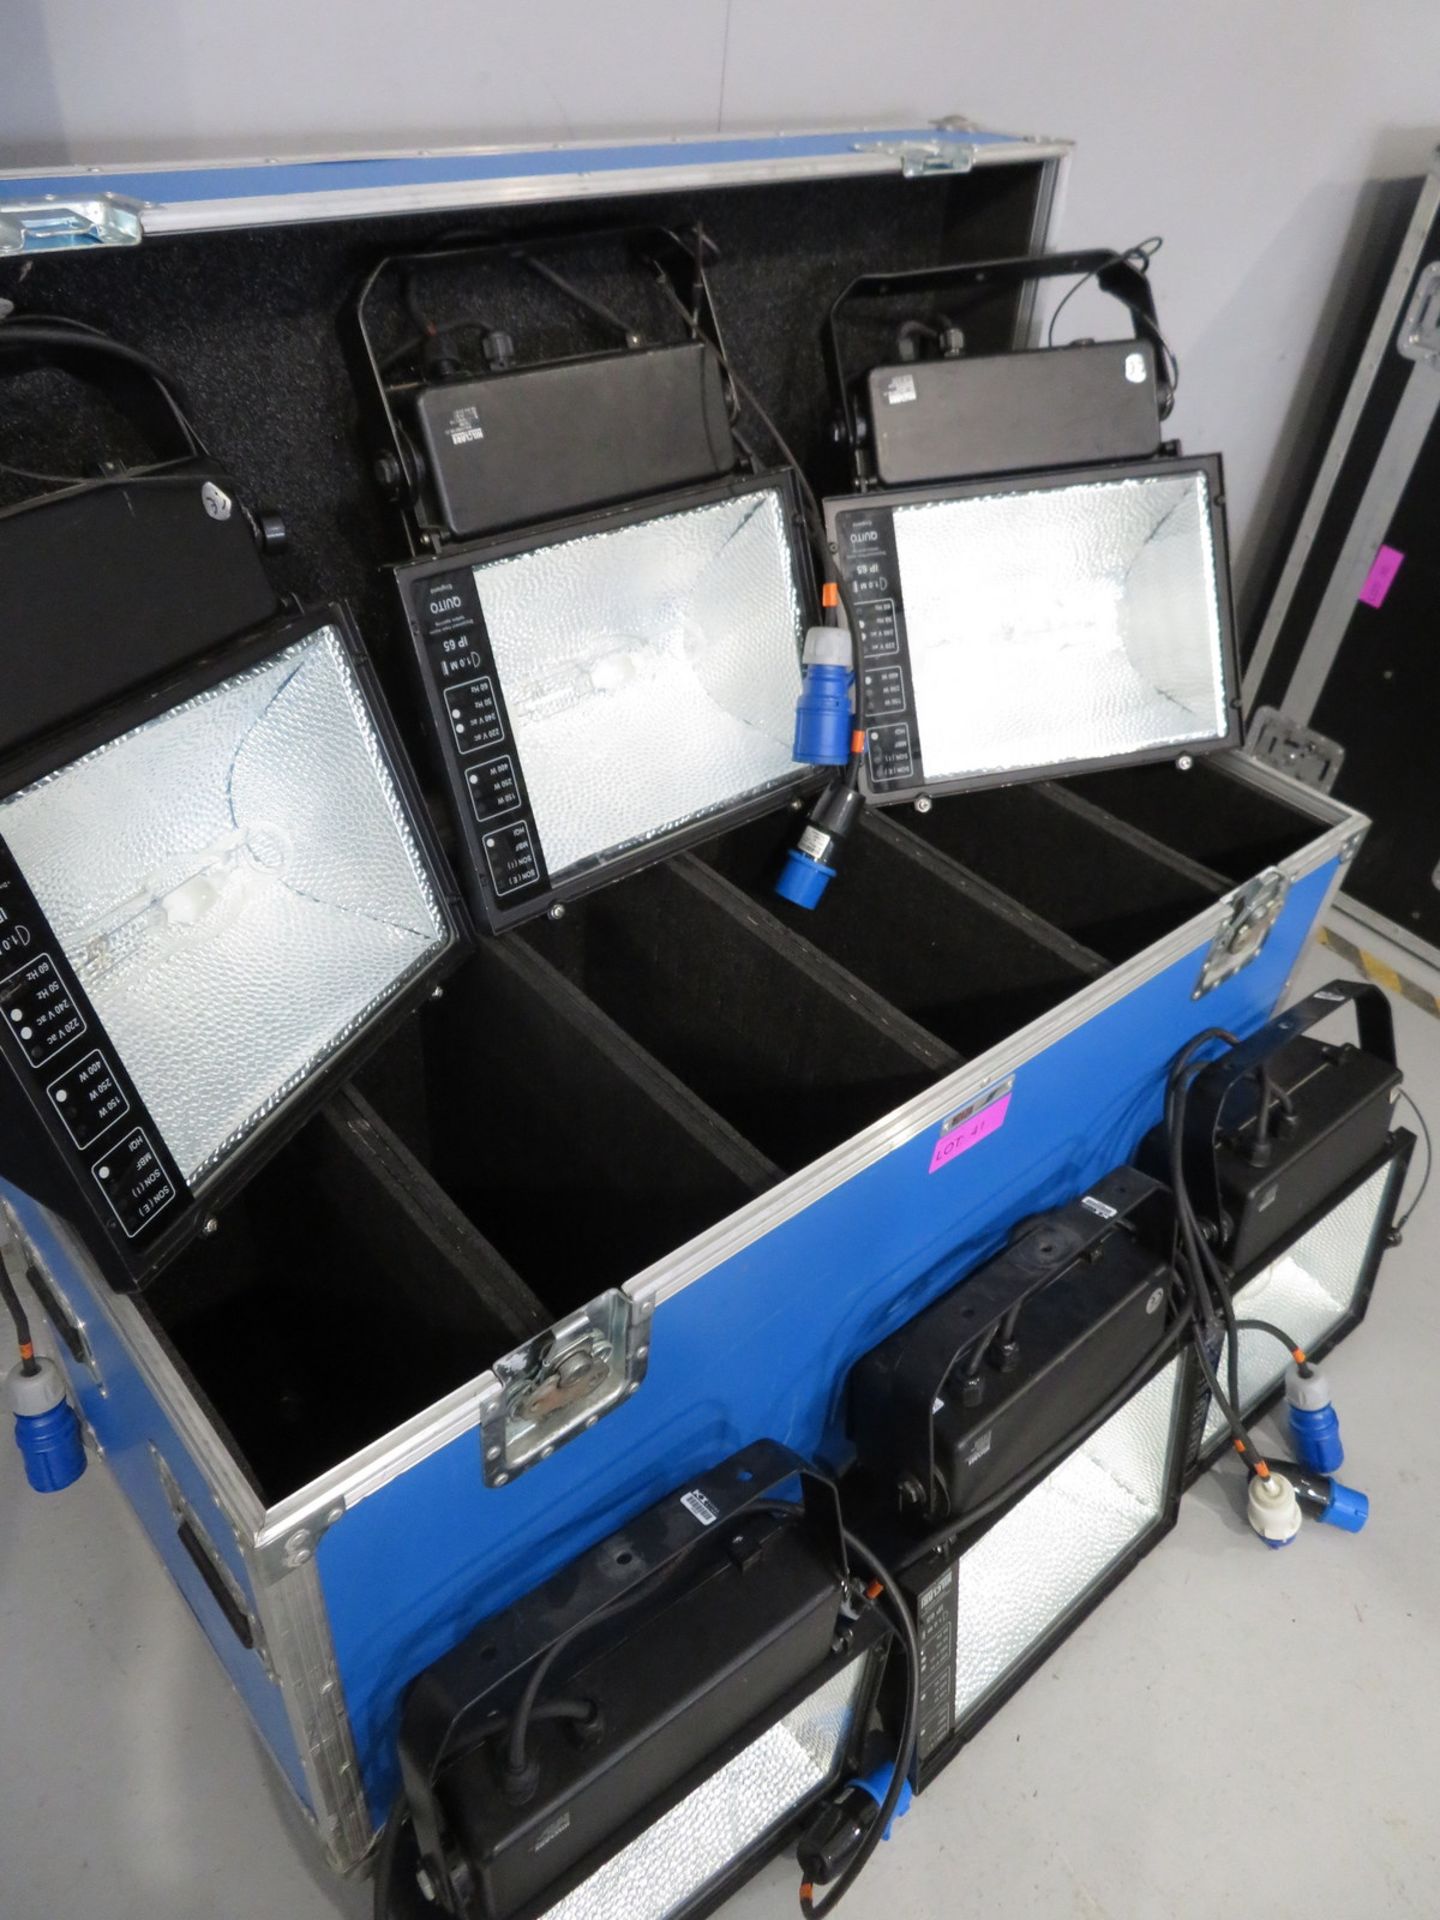 6x HQI 400w Floodlights in flight case. Includes safety bonds. Working condition. - Image 7 of 7